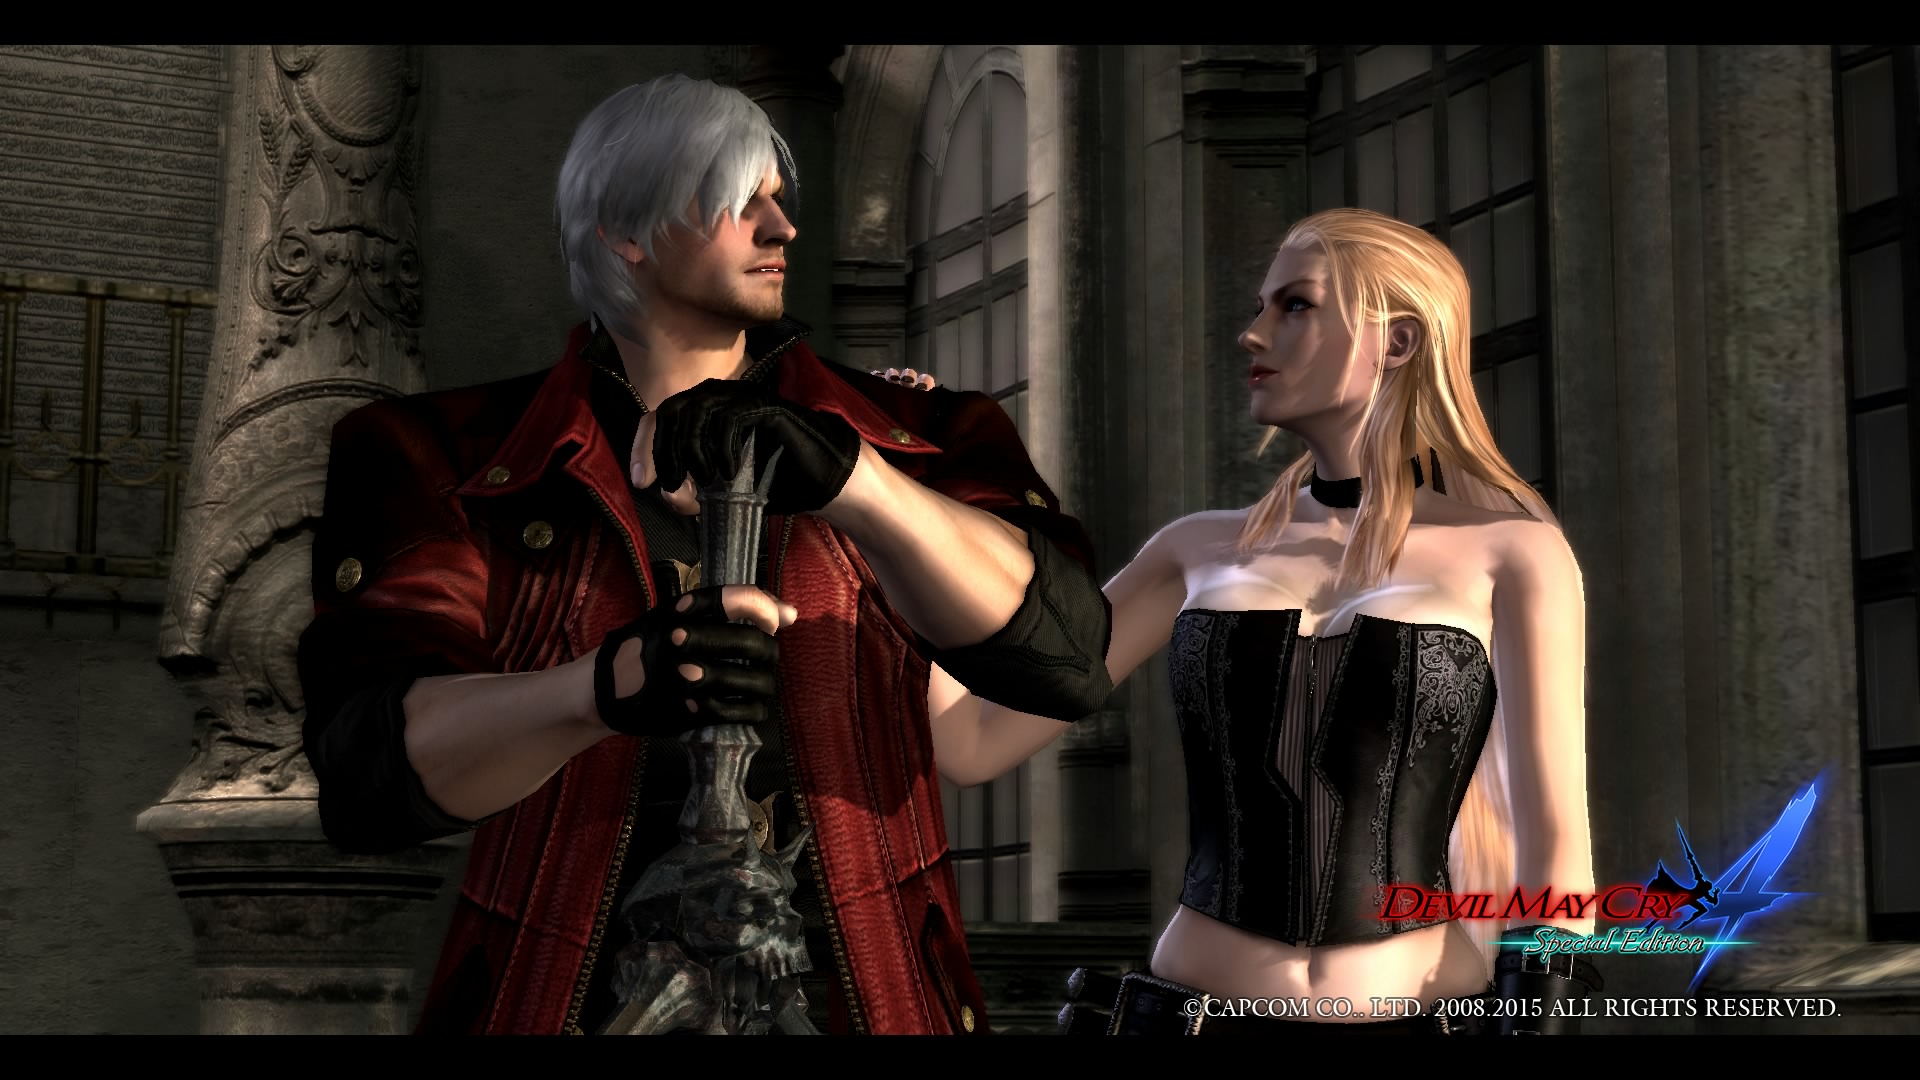 Devil May Cry 4 Features